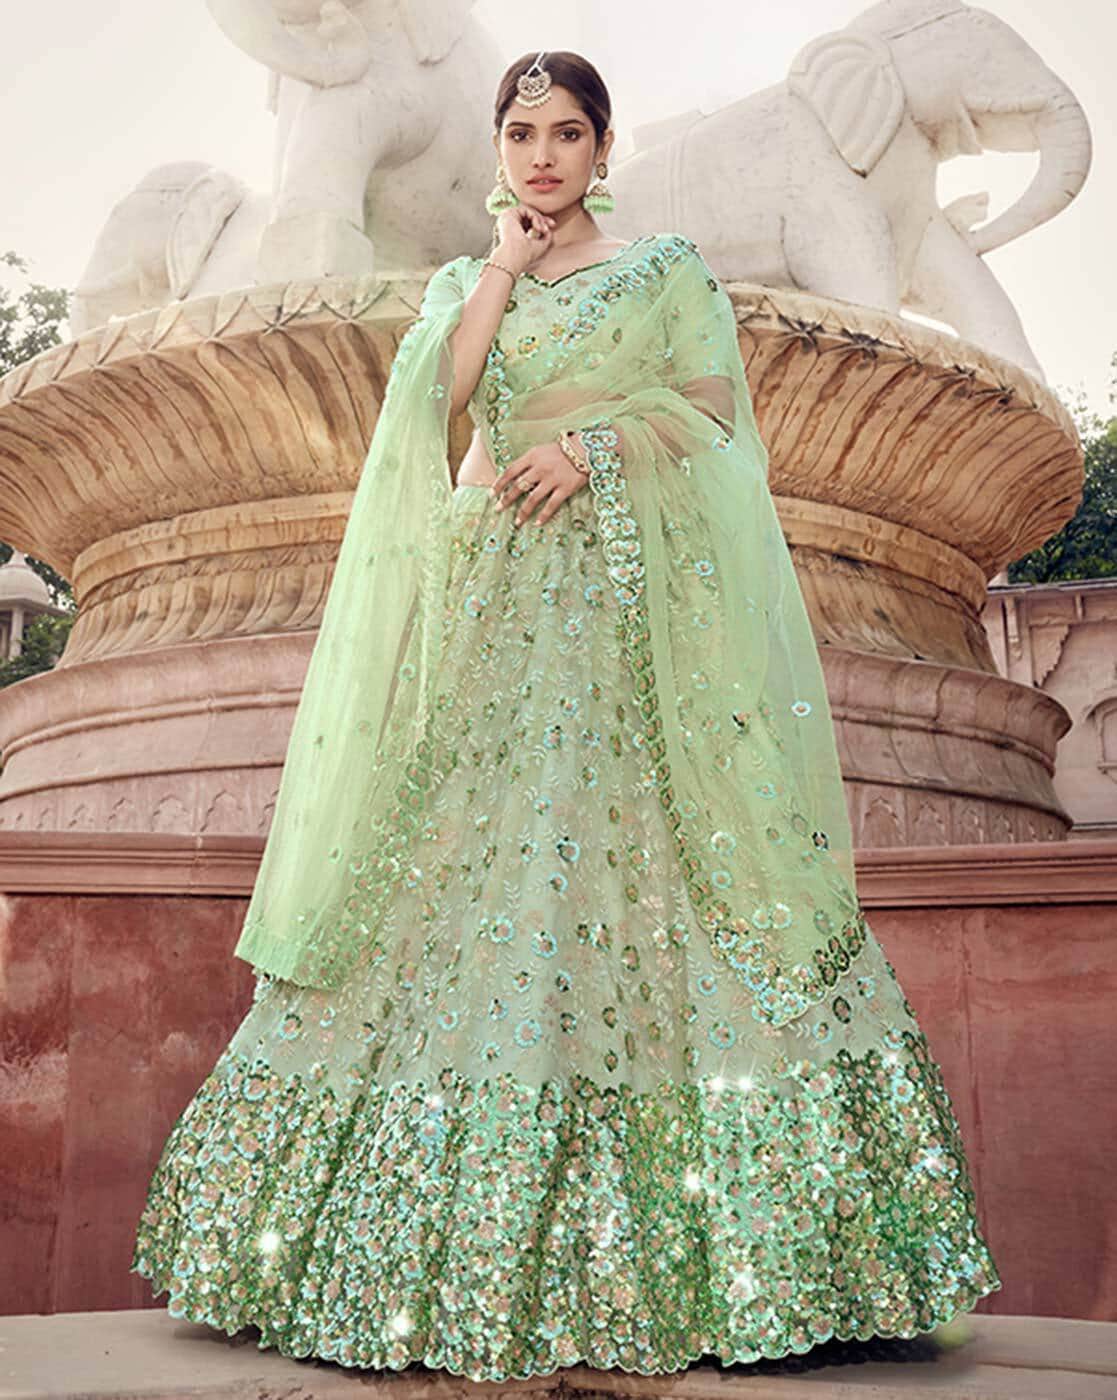 Premya By Manishii Sequins Embroidered Pleated Lehenga Set | Green,  Sequins, Blouse, Sweethear… | Party wear indian dresses, Full flared skirt,  Wedding dress outfit